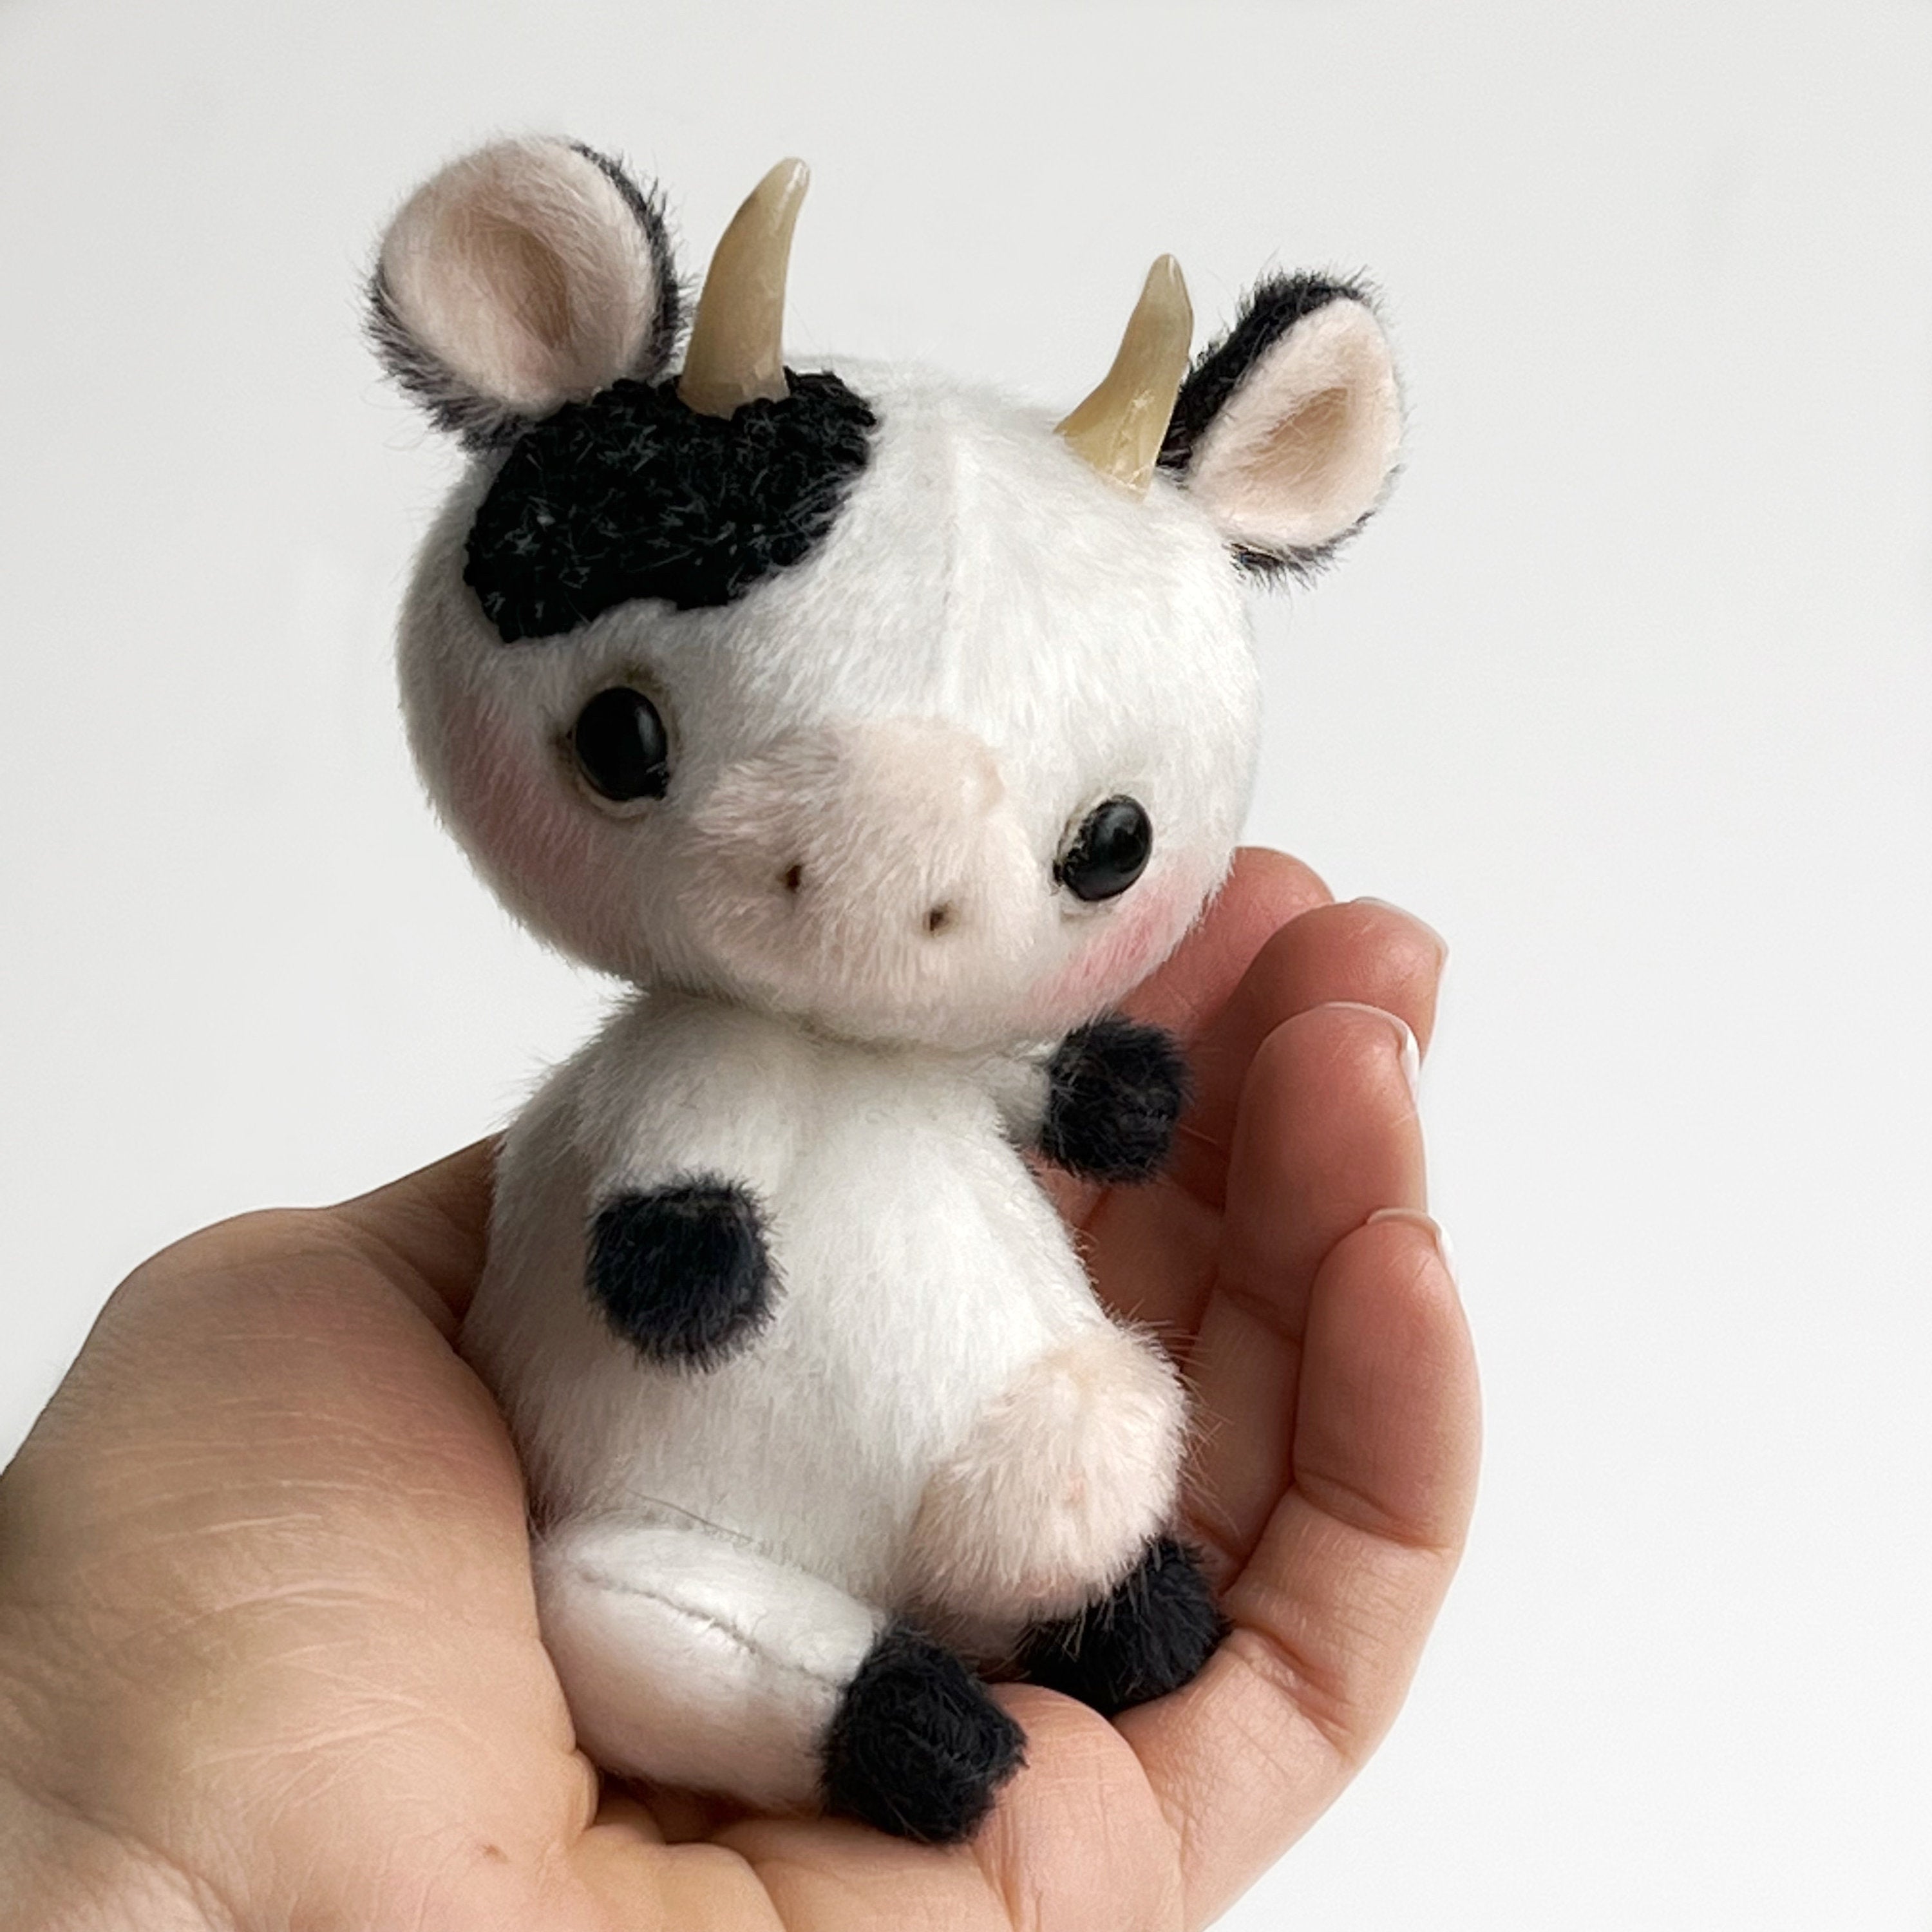 Cow - PDF sewing pattern, artist pattern, stuffed toy tutorials, soft animal, soft toy diy craft kit for adults gift by TSminibears